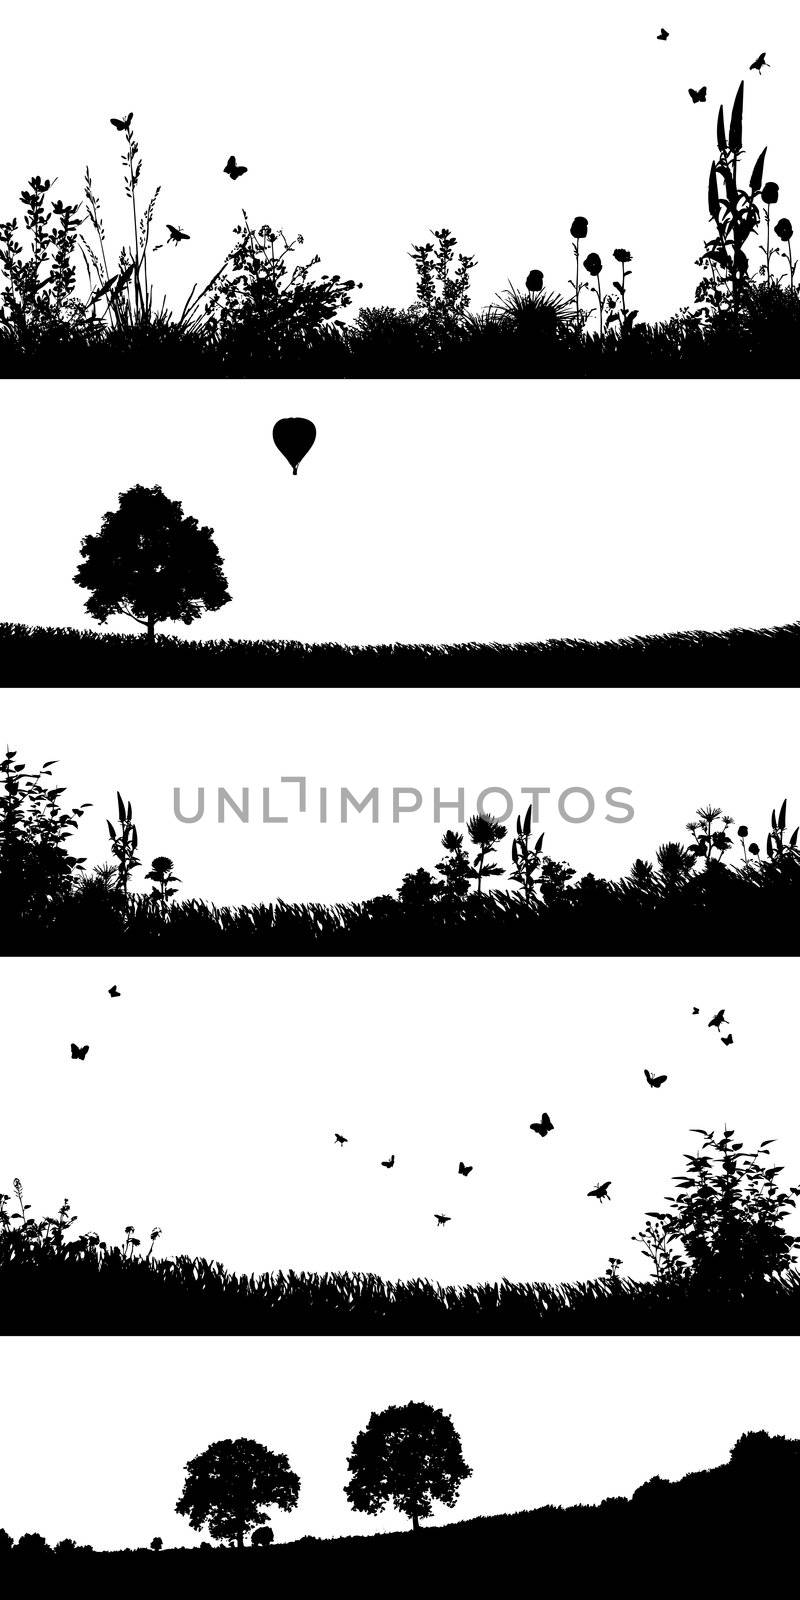 A vector foreground illustration with flowers and trees